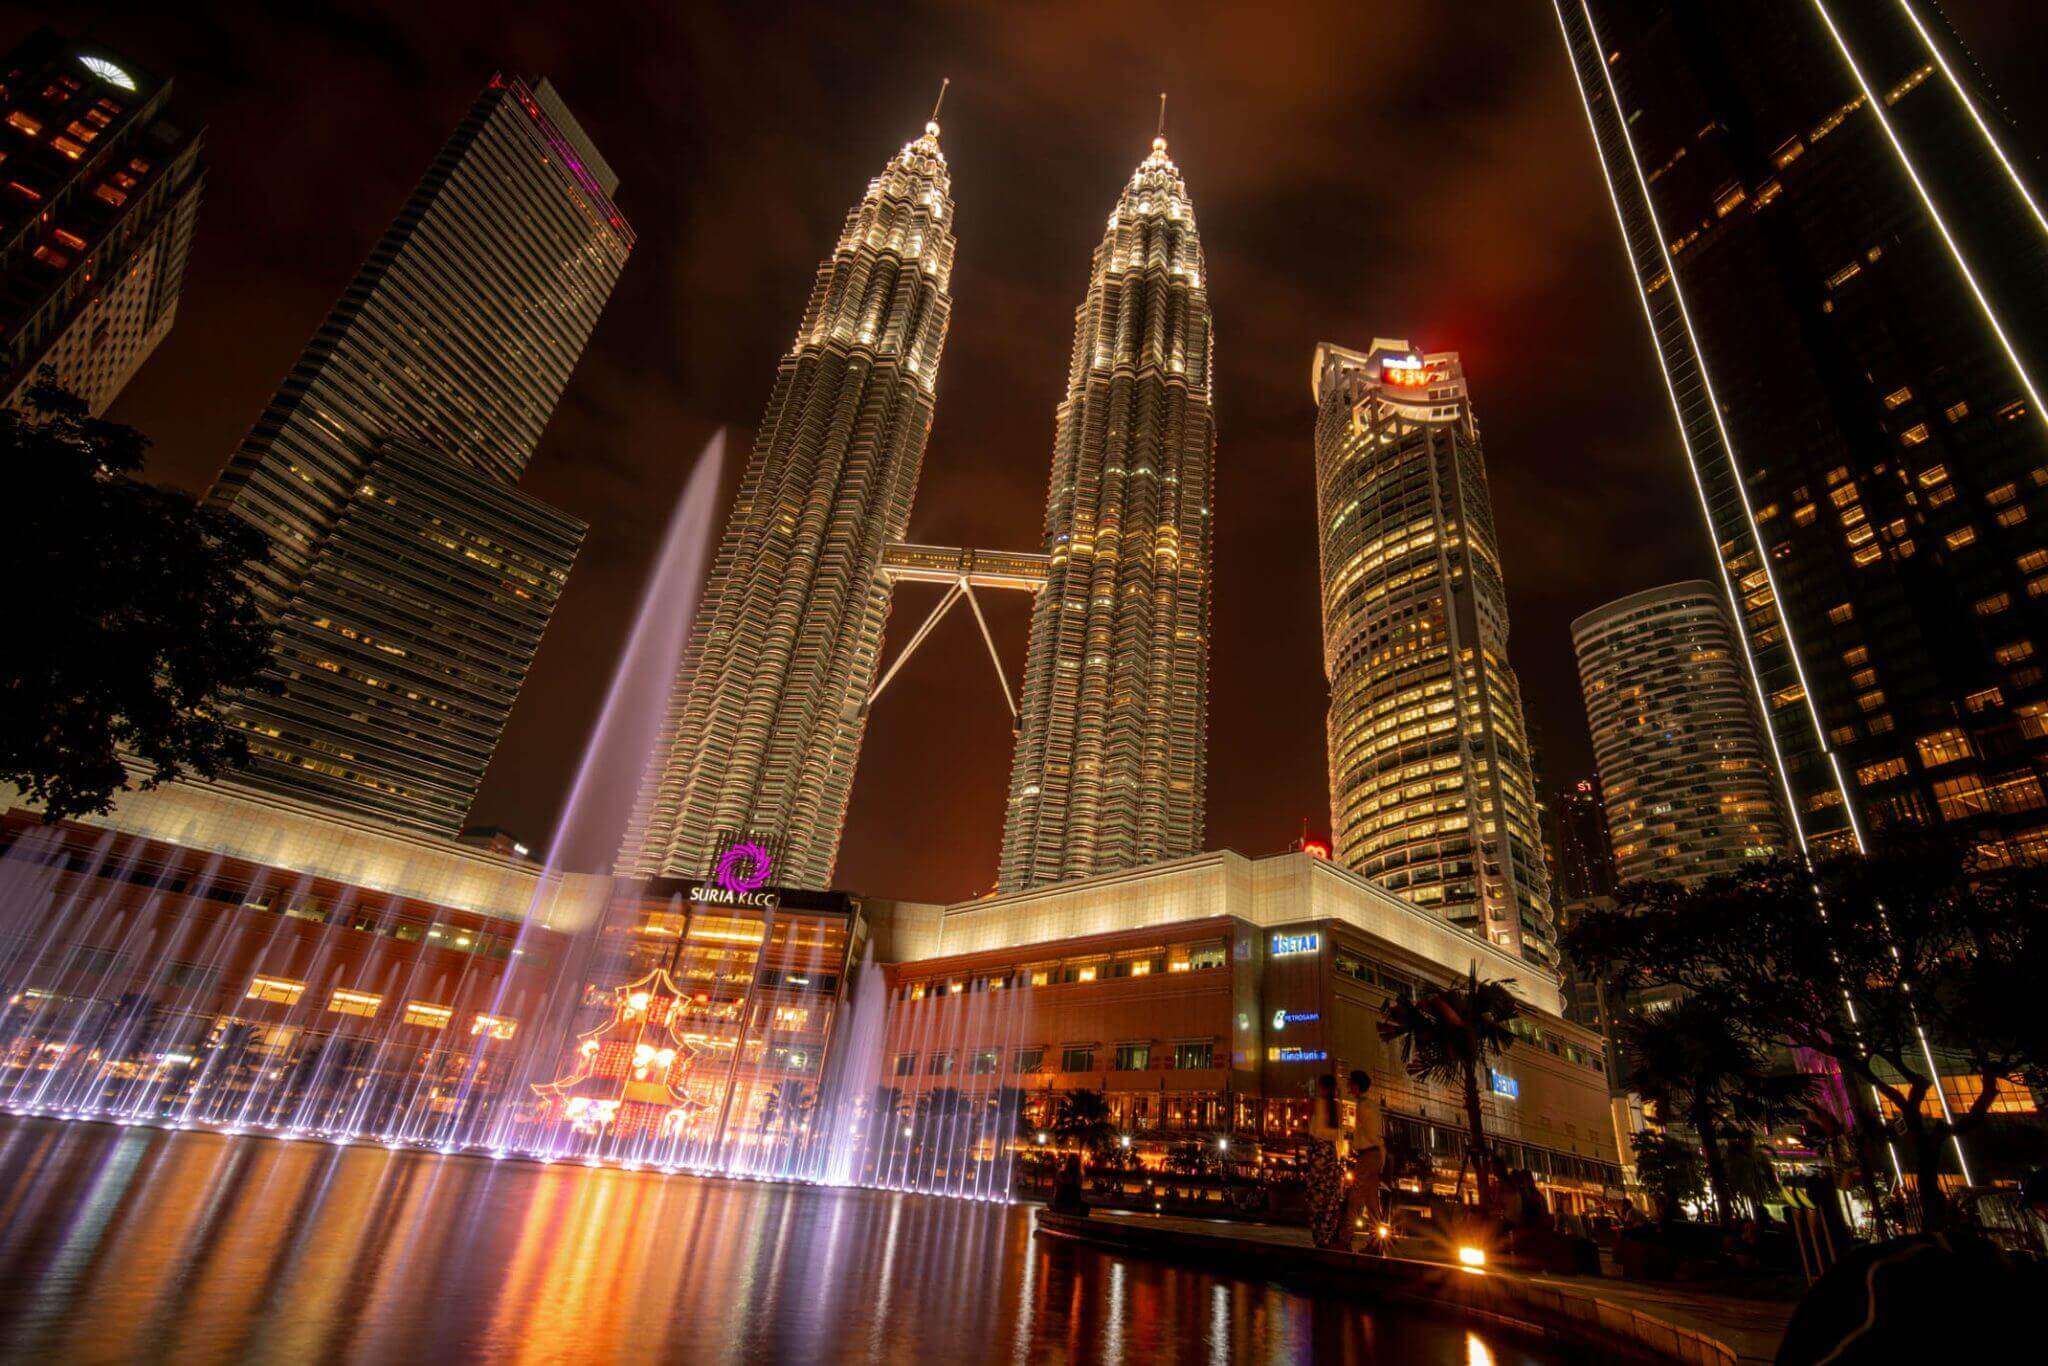 48 hours in Kuala Lumpur: The best things to do, see and eat